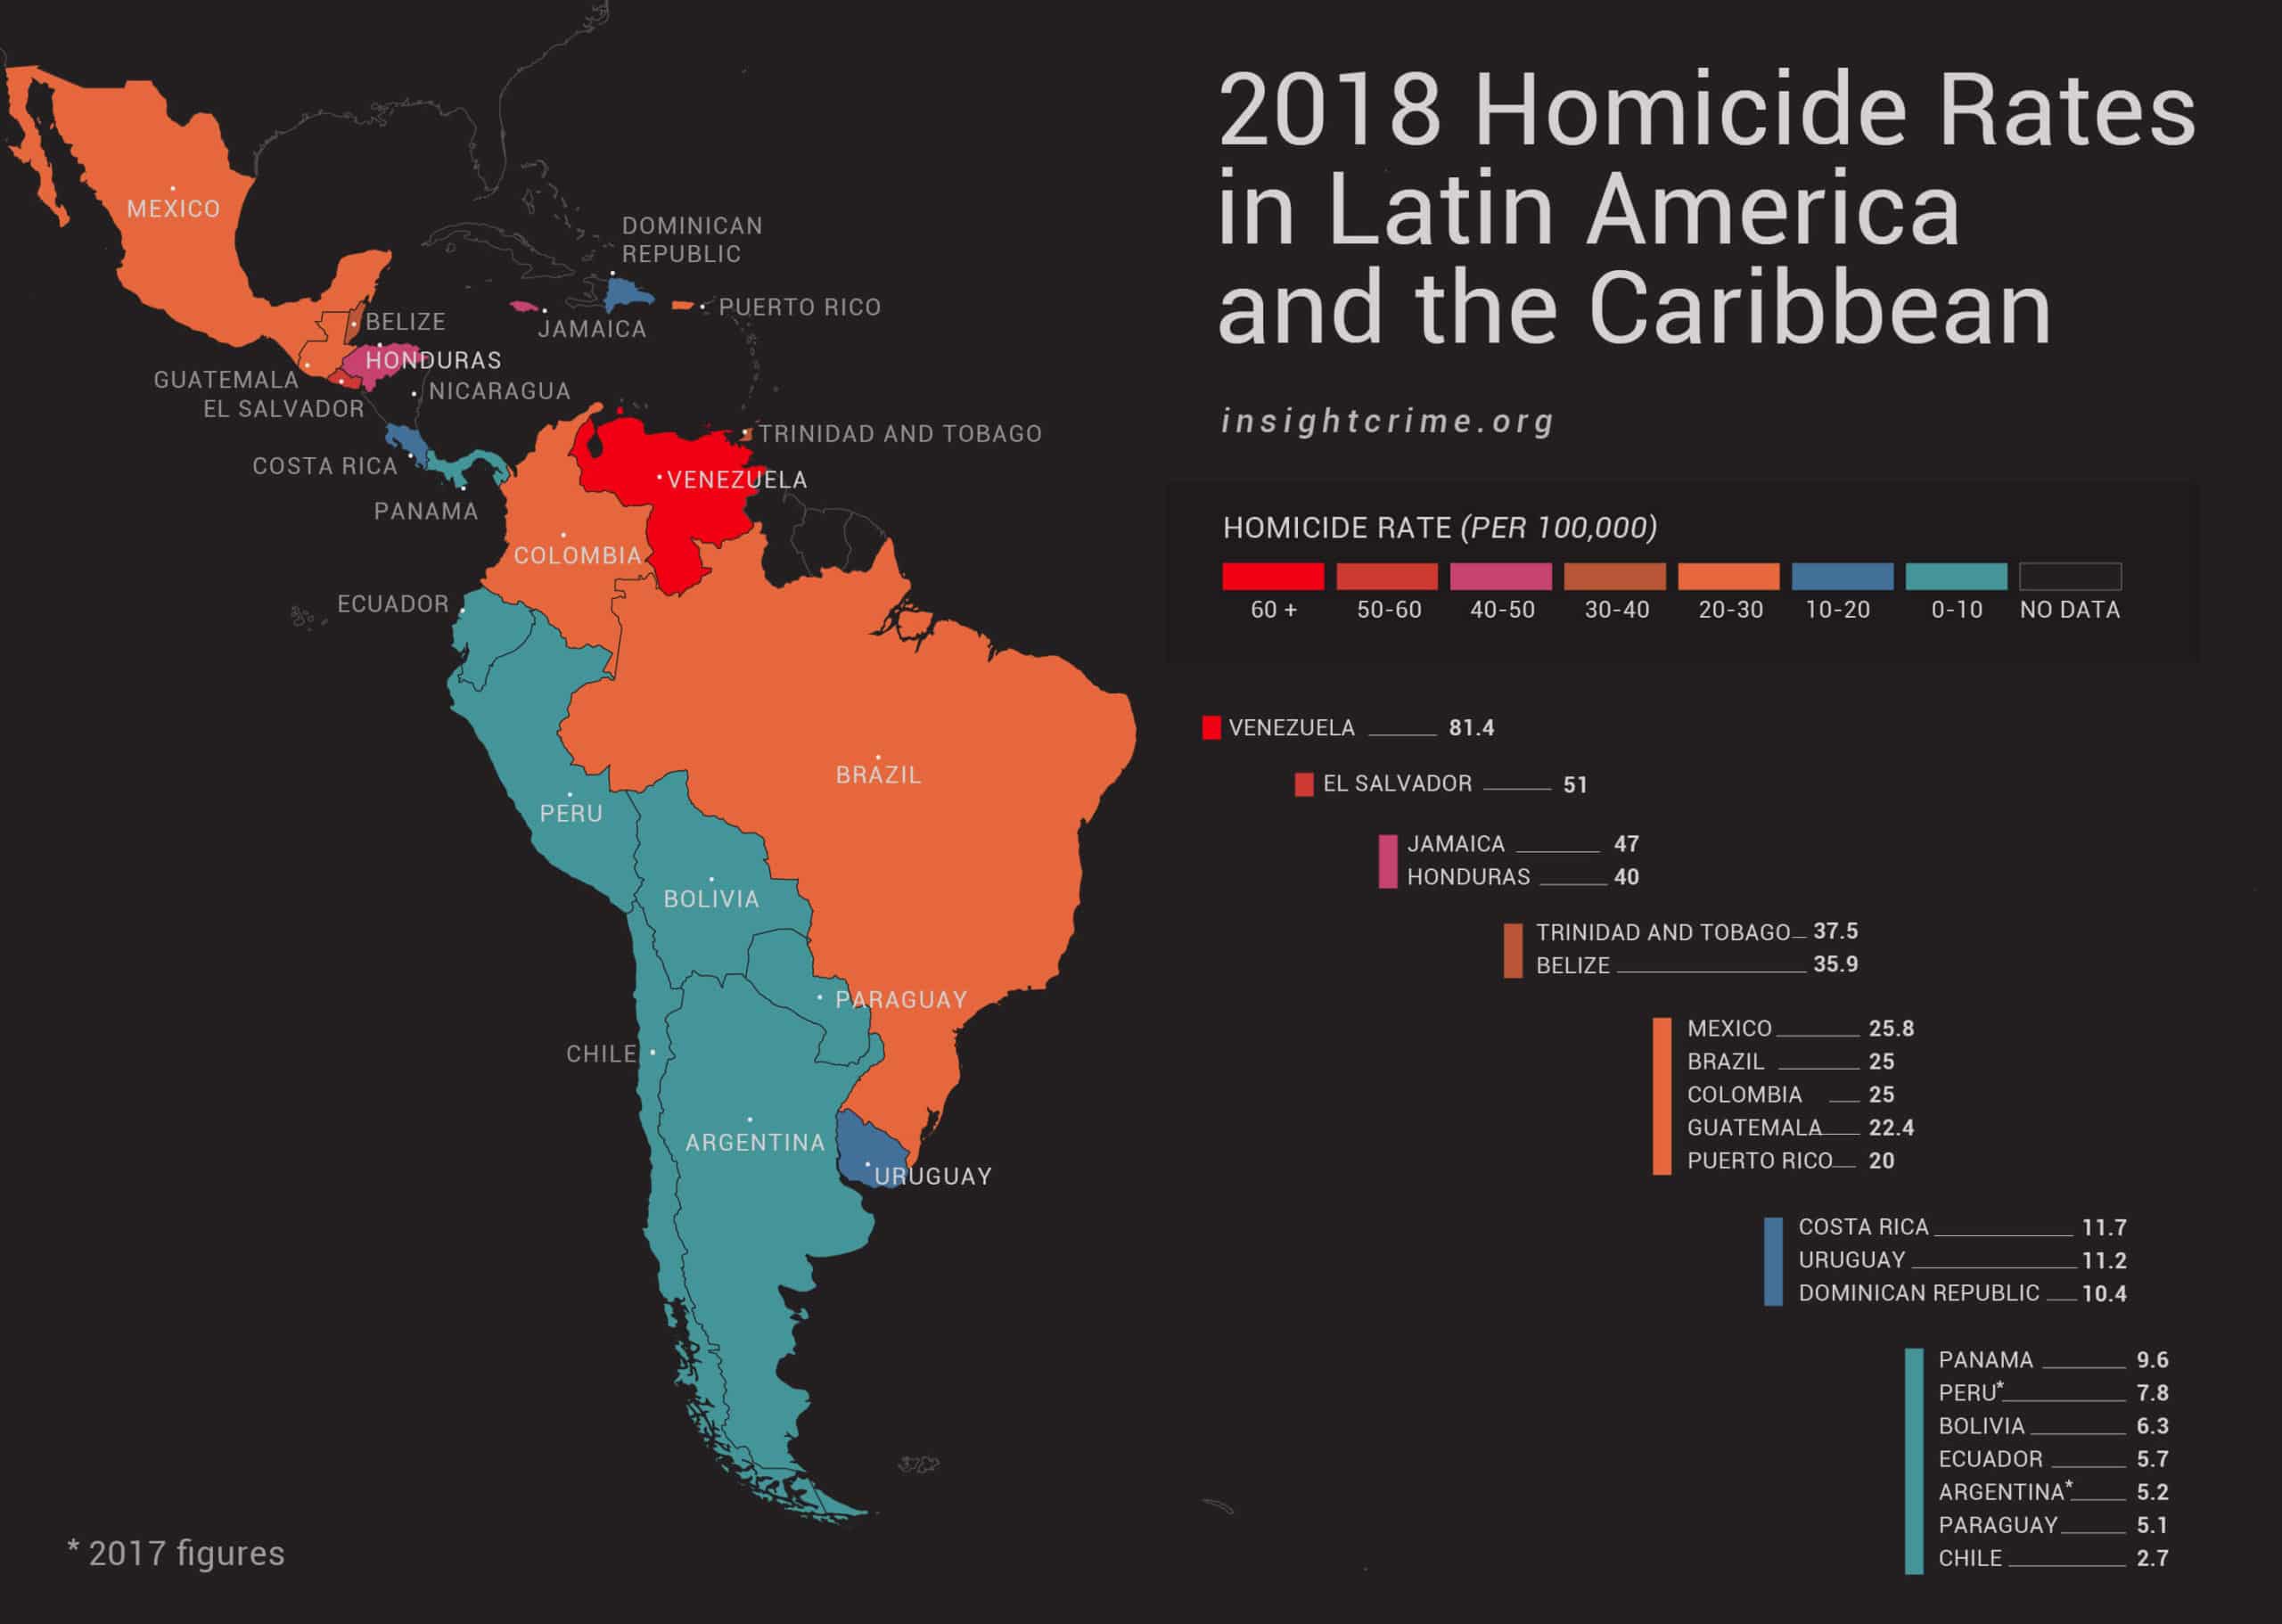 21-01-19_Homicide-Rates-in-Latin-America-and-the-Caribbeans-2018_InSight-Crime_Map-01.jpg